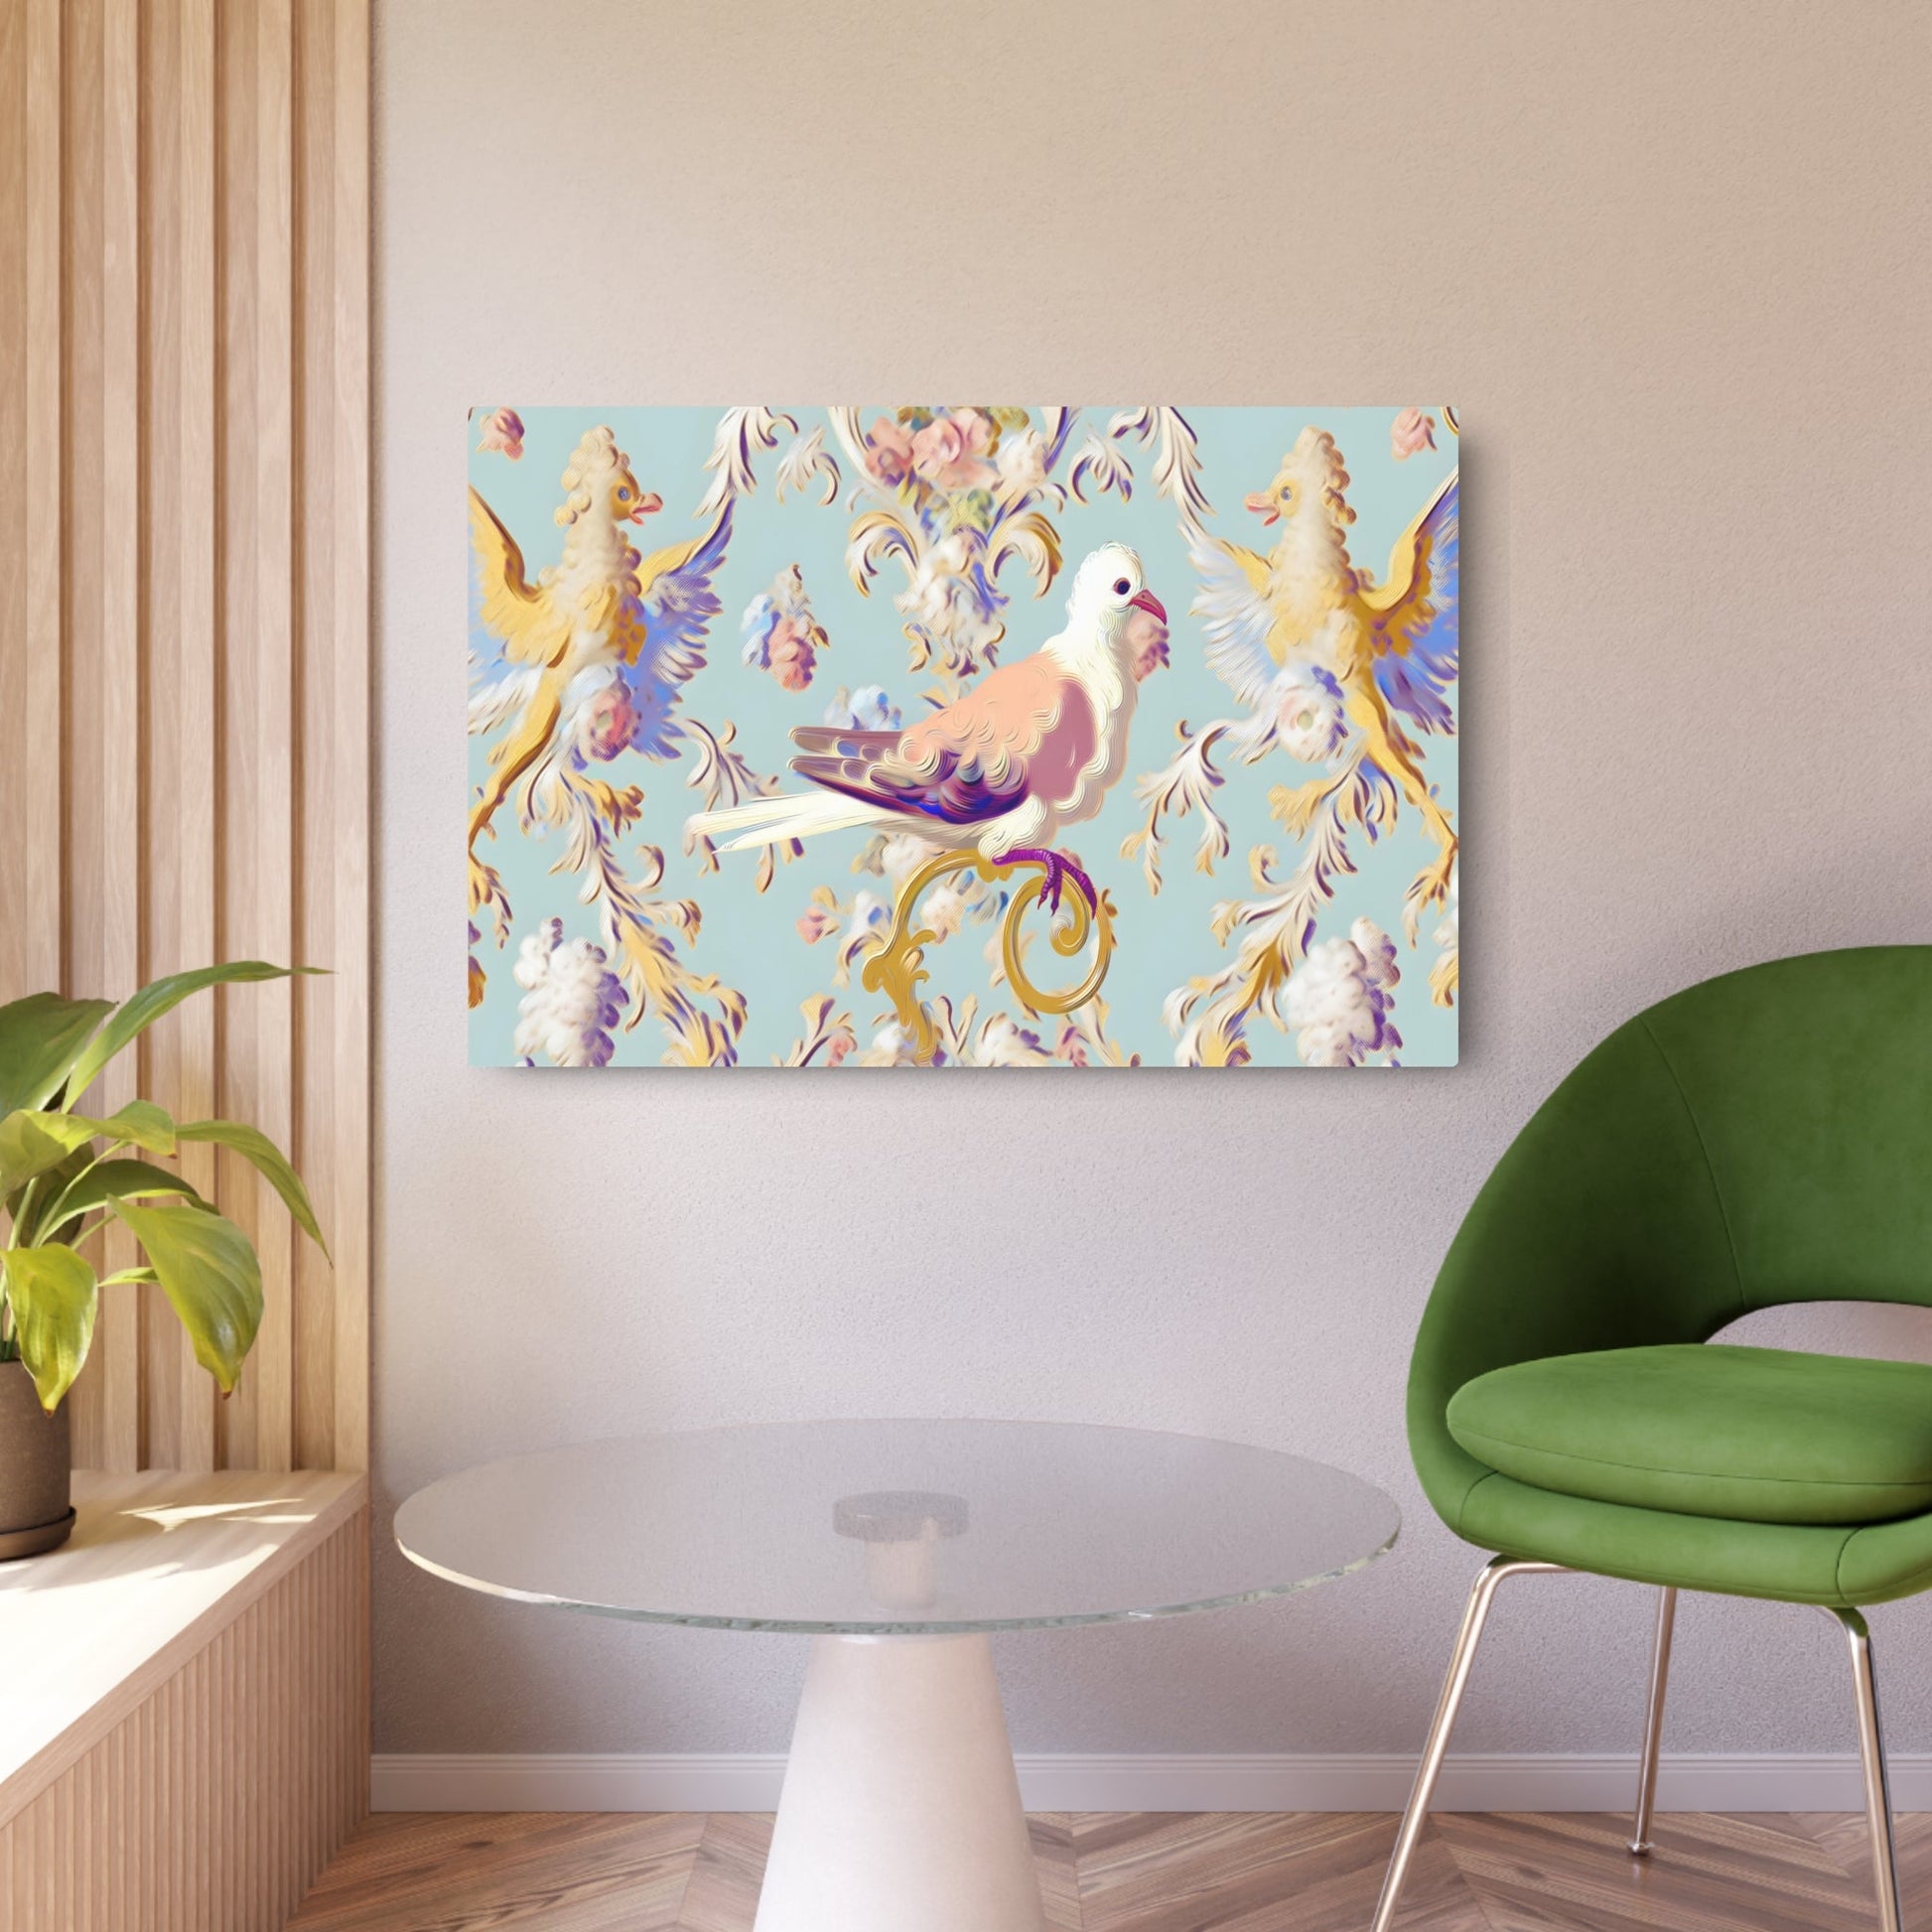 Metal Poster Art | "Pastel Rococo Style Western Art Painting - Intricate Opulent Bird Scene with Playful Ornate Detailing" - Metal Poster Art 36″ x 24″ (Horizontal) 0.12''